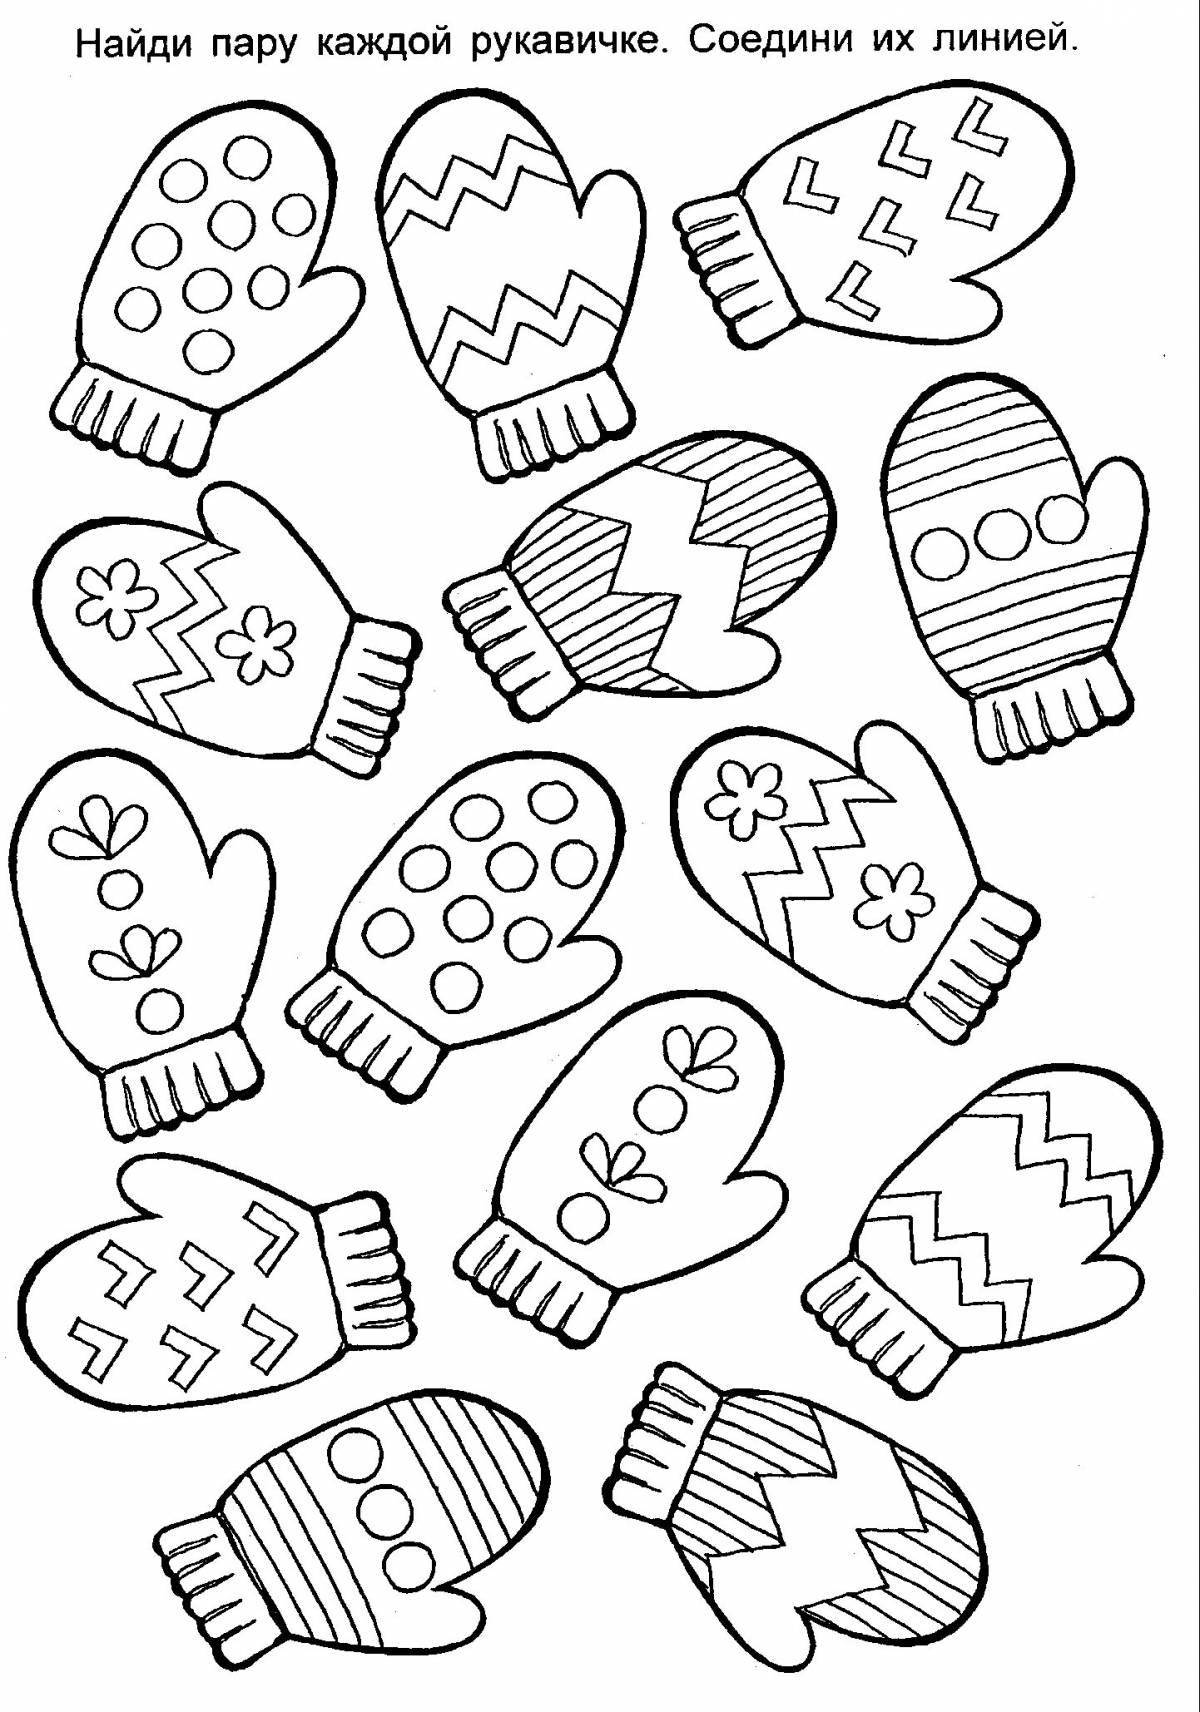 Fabulous mittens coloring book for children 4-5 years old